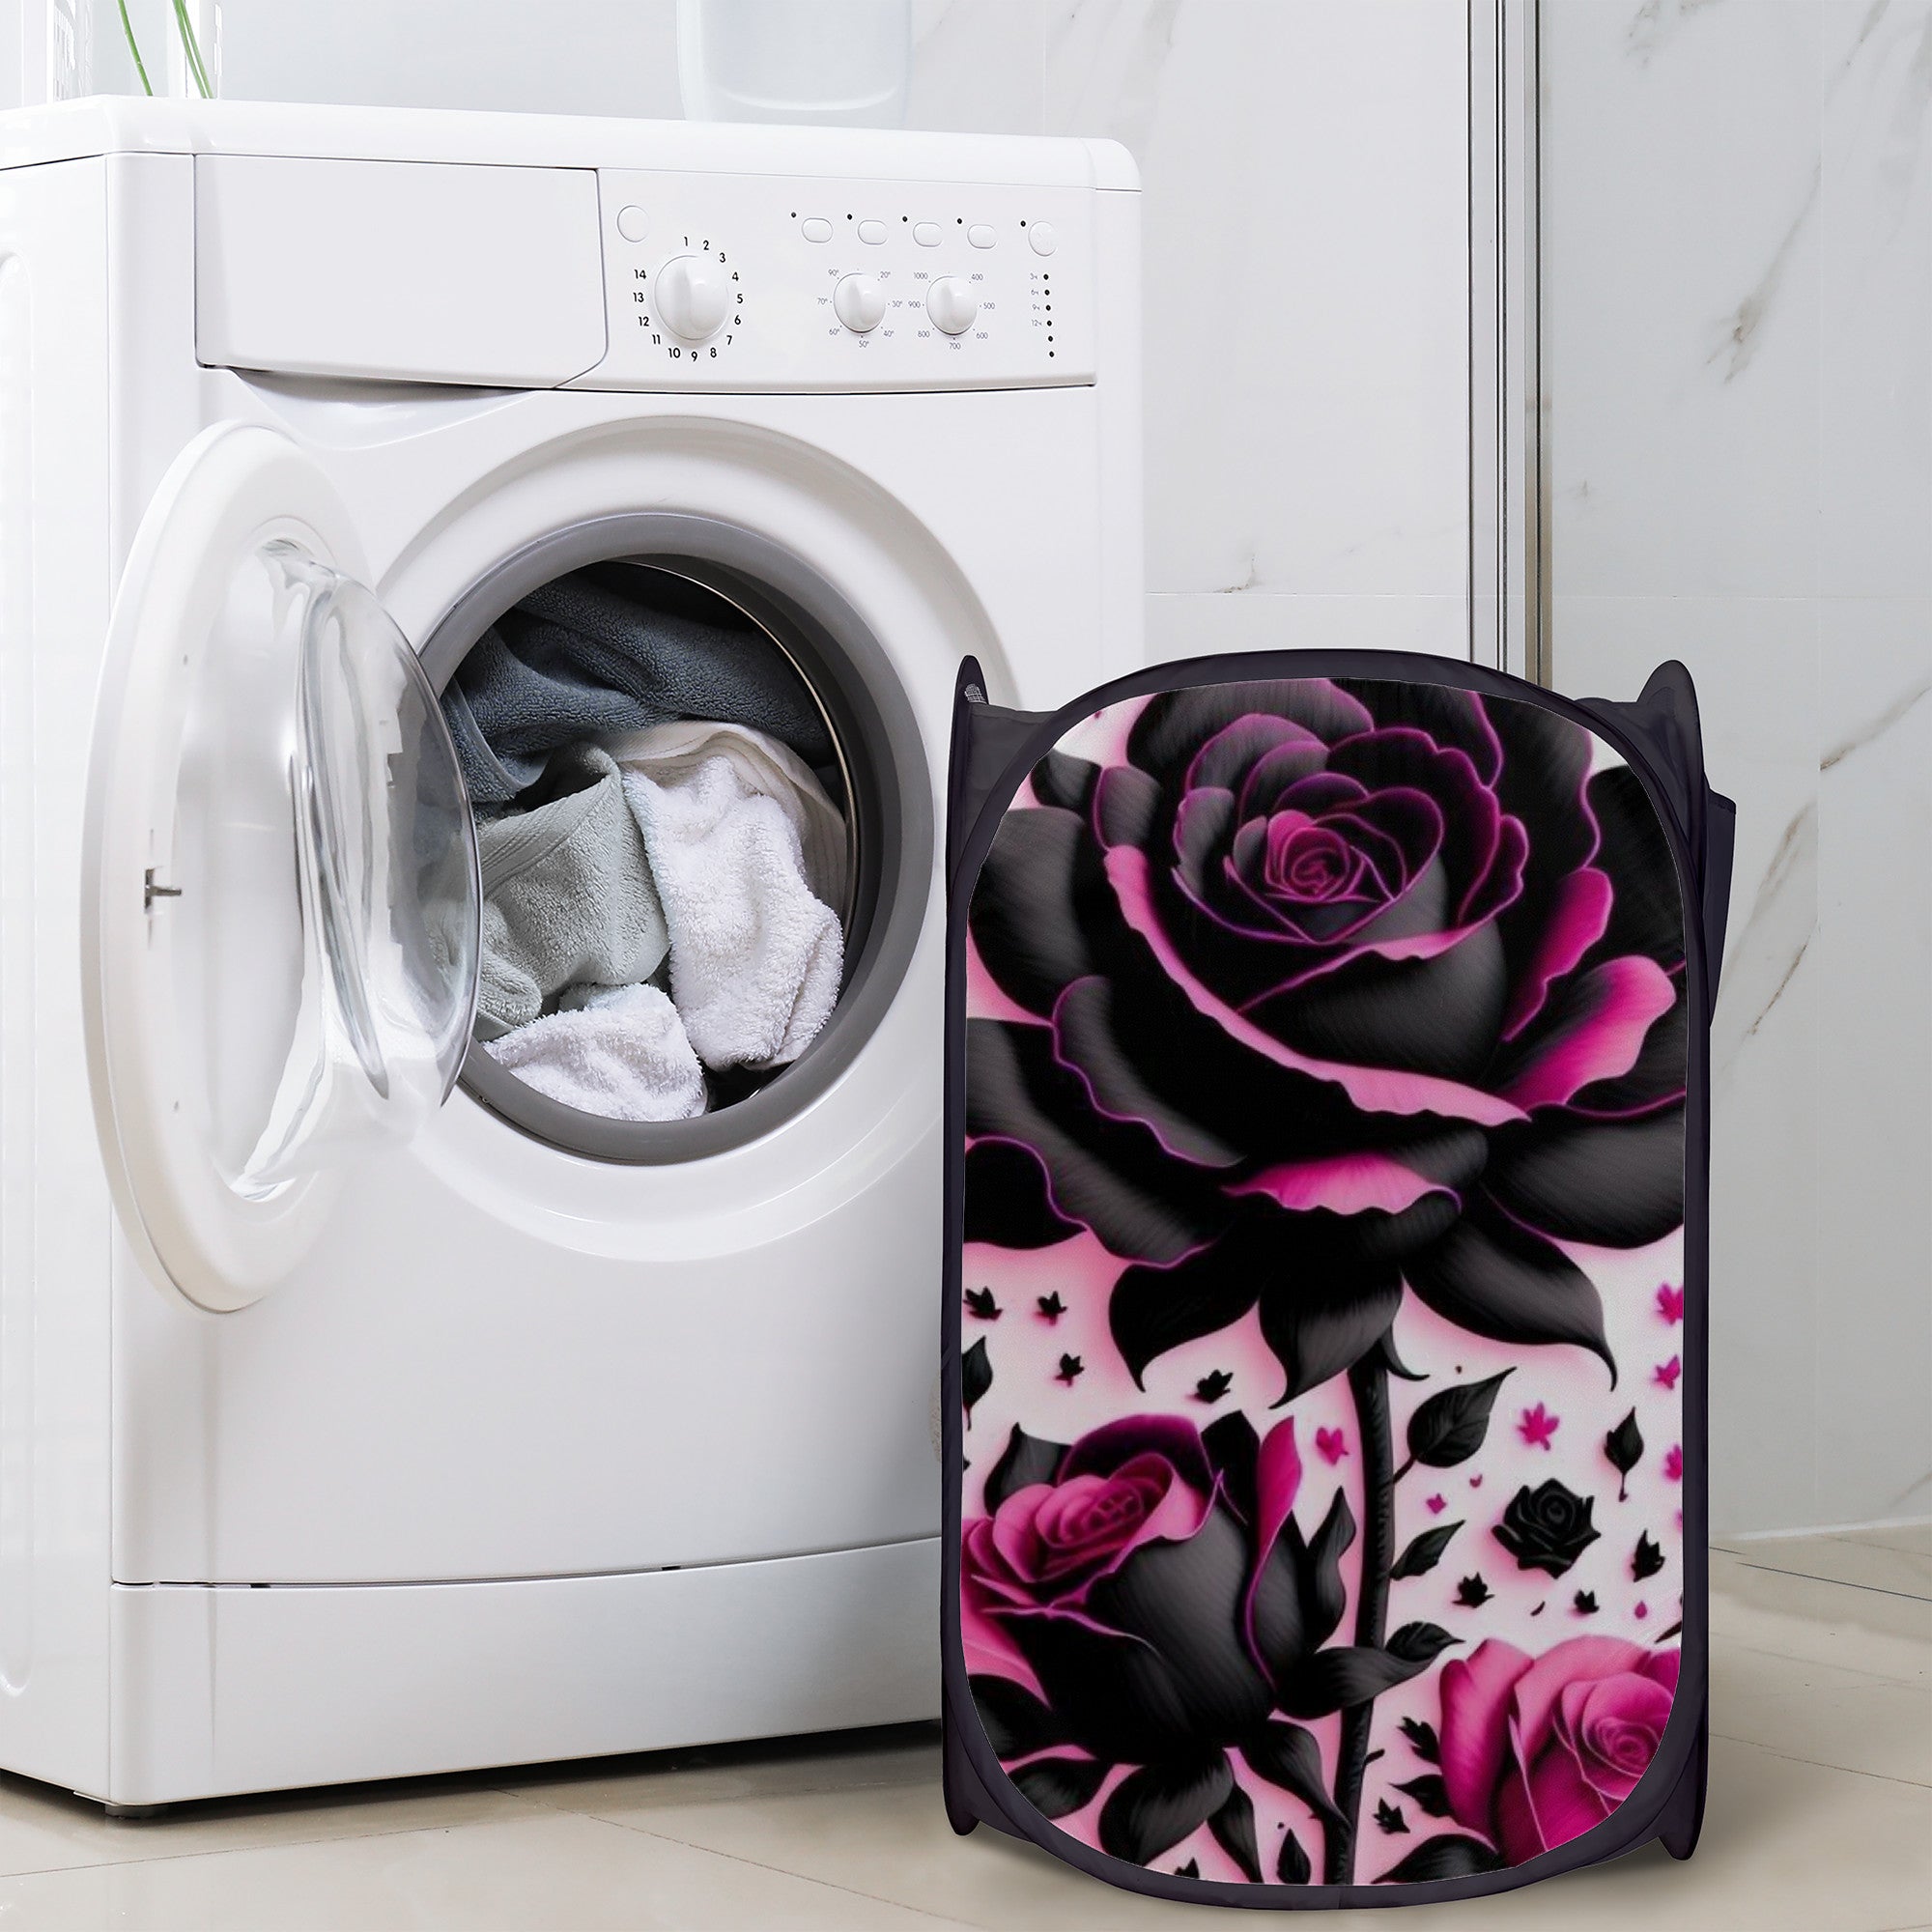 SF_D99 Laundry Hampers Black with purple roses Home-clothes-jewelry